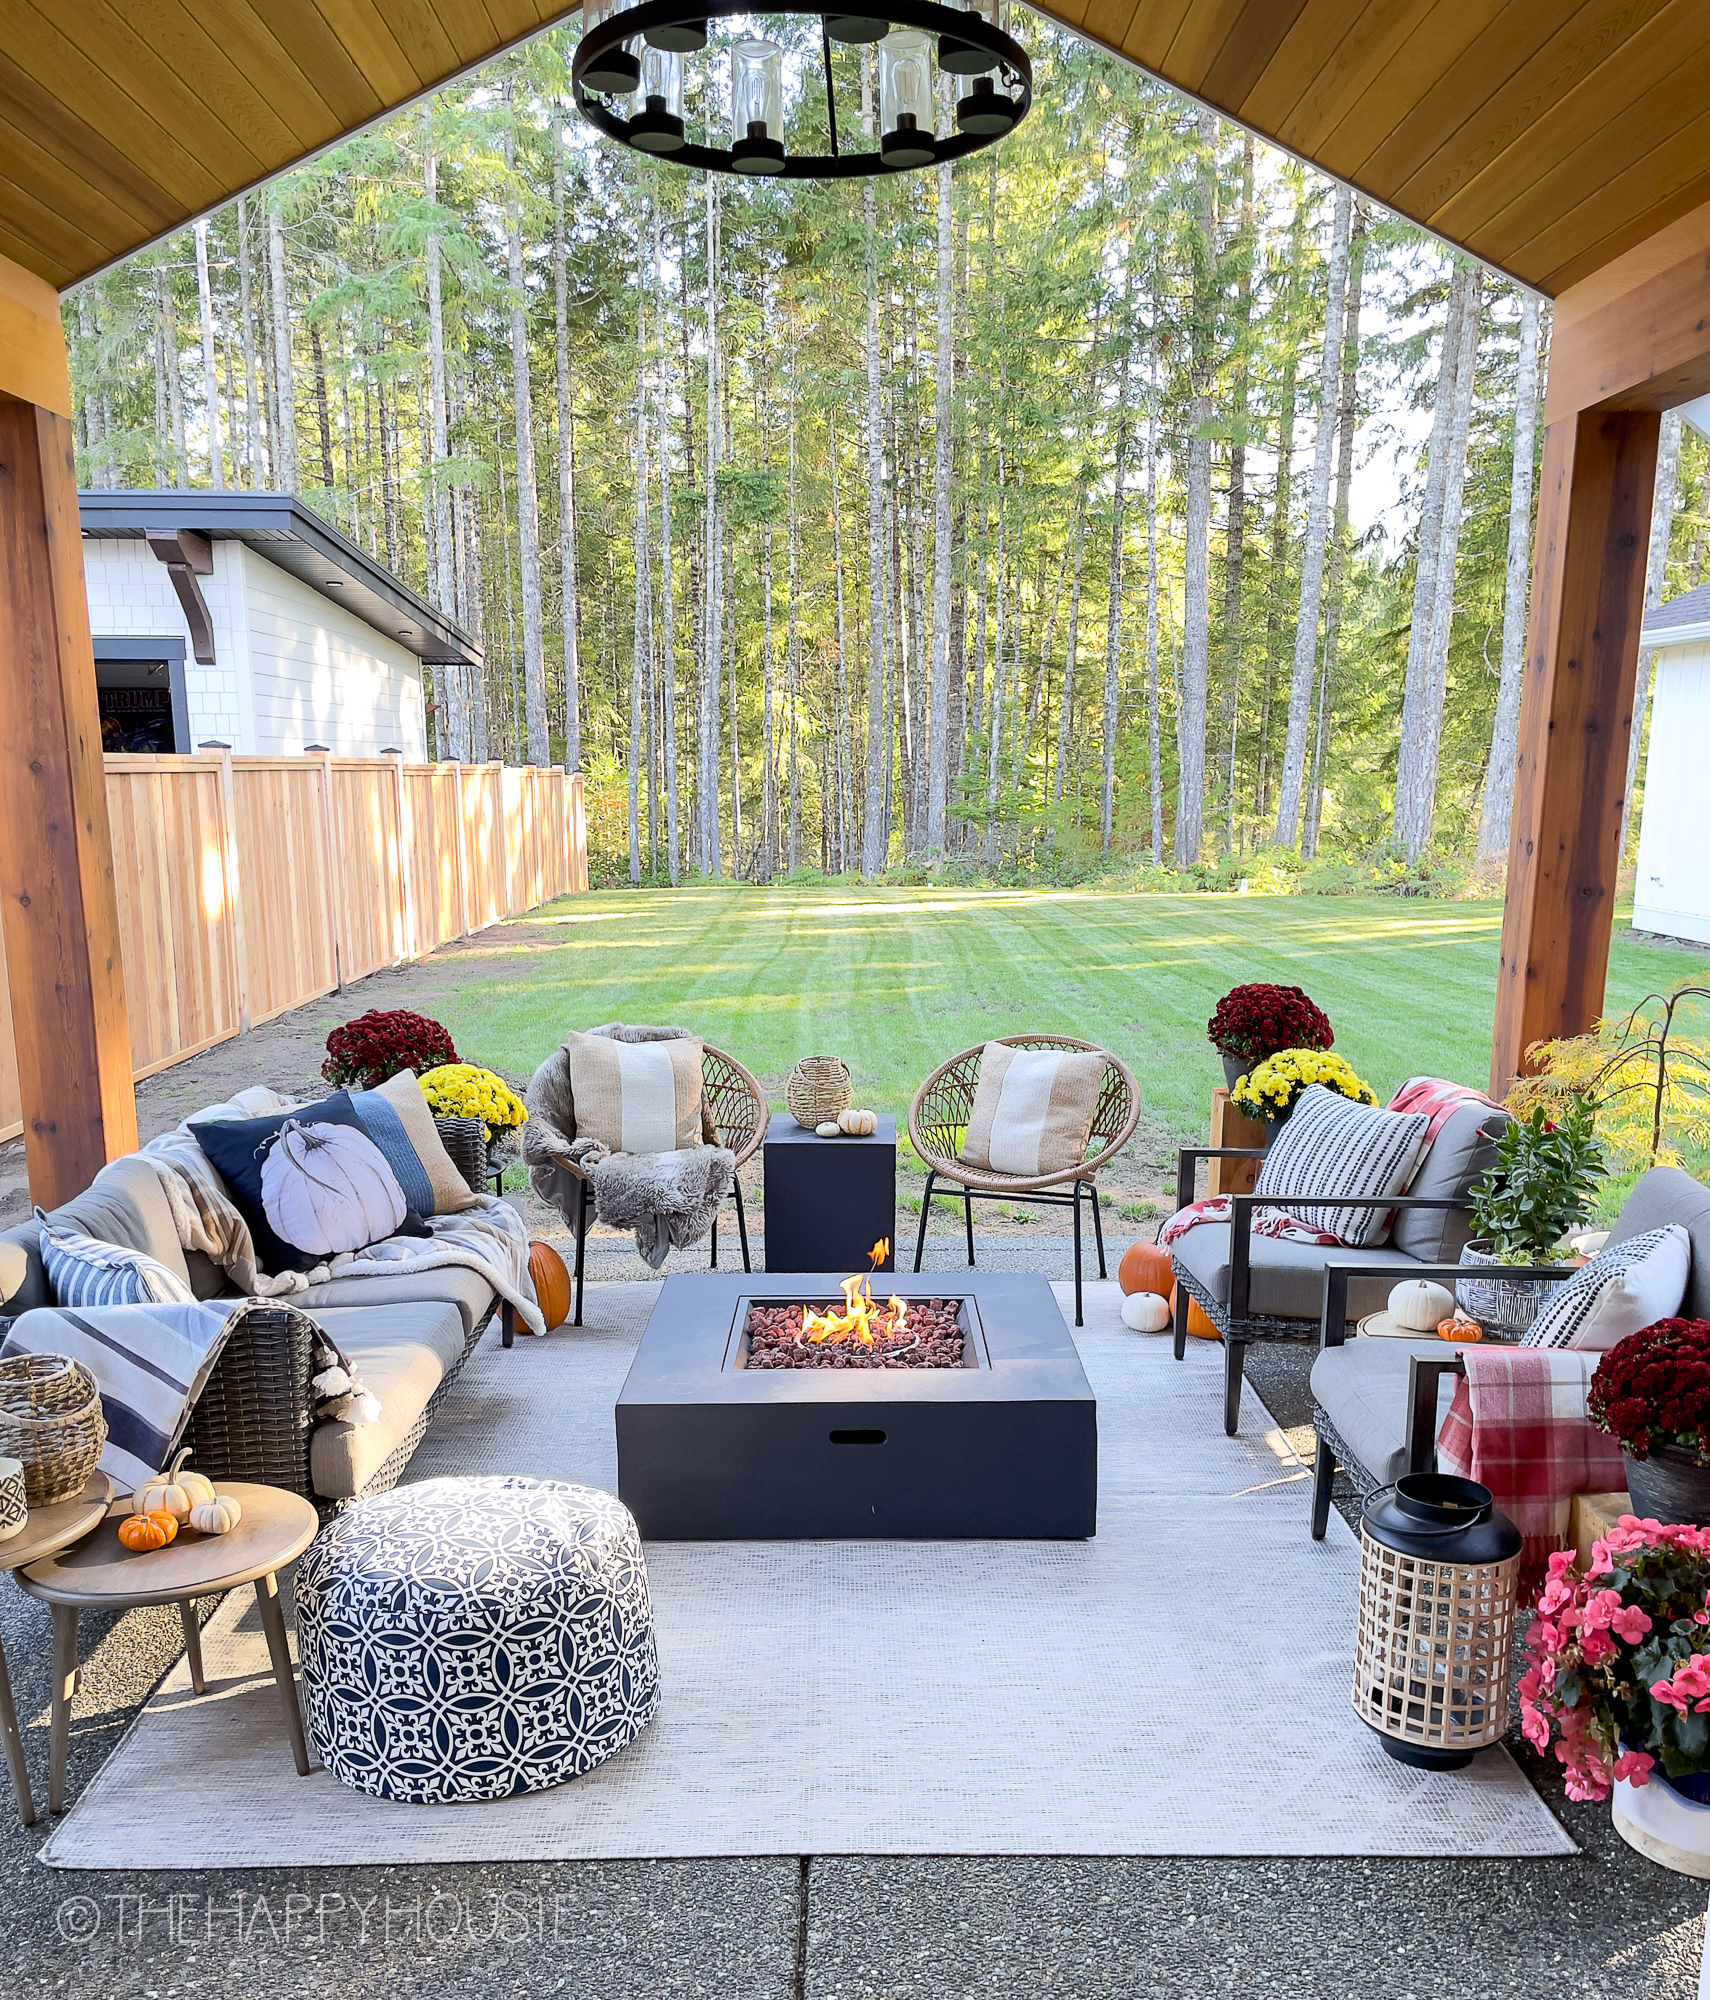 Our Fall Patio & 8 Ways to Cozy Up Your Patio for Fall